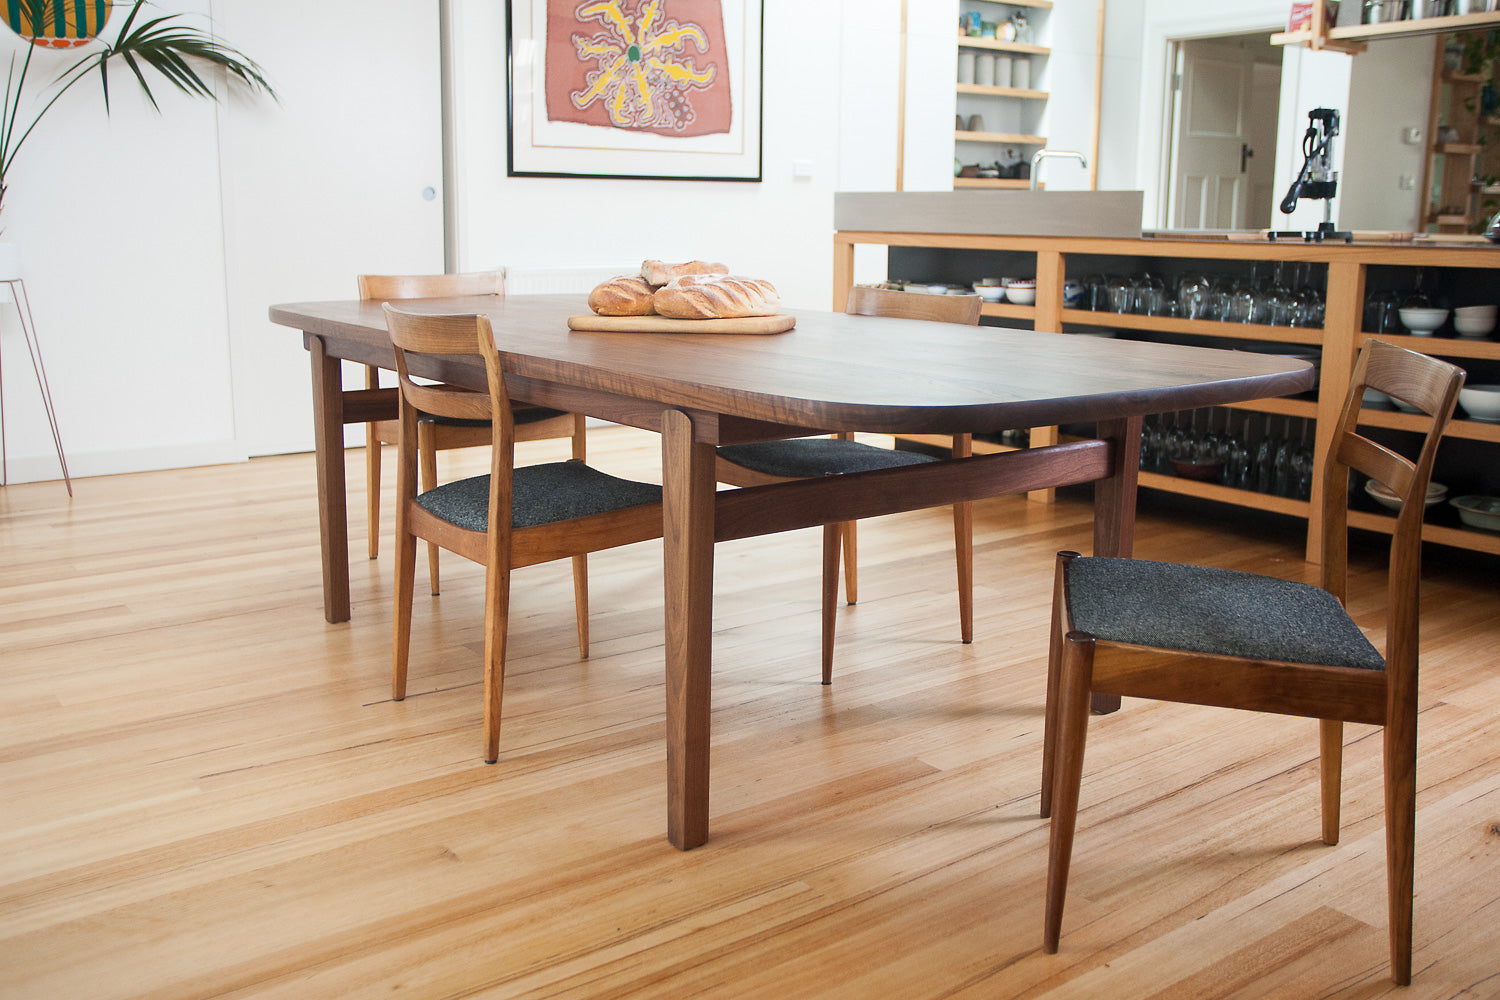 Wesley Dining Table in Walnut pictured with bread, dining chairs with kitchen in the background - 3/4 view. Designed and made by Hey, Porter.